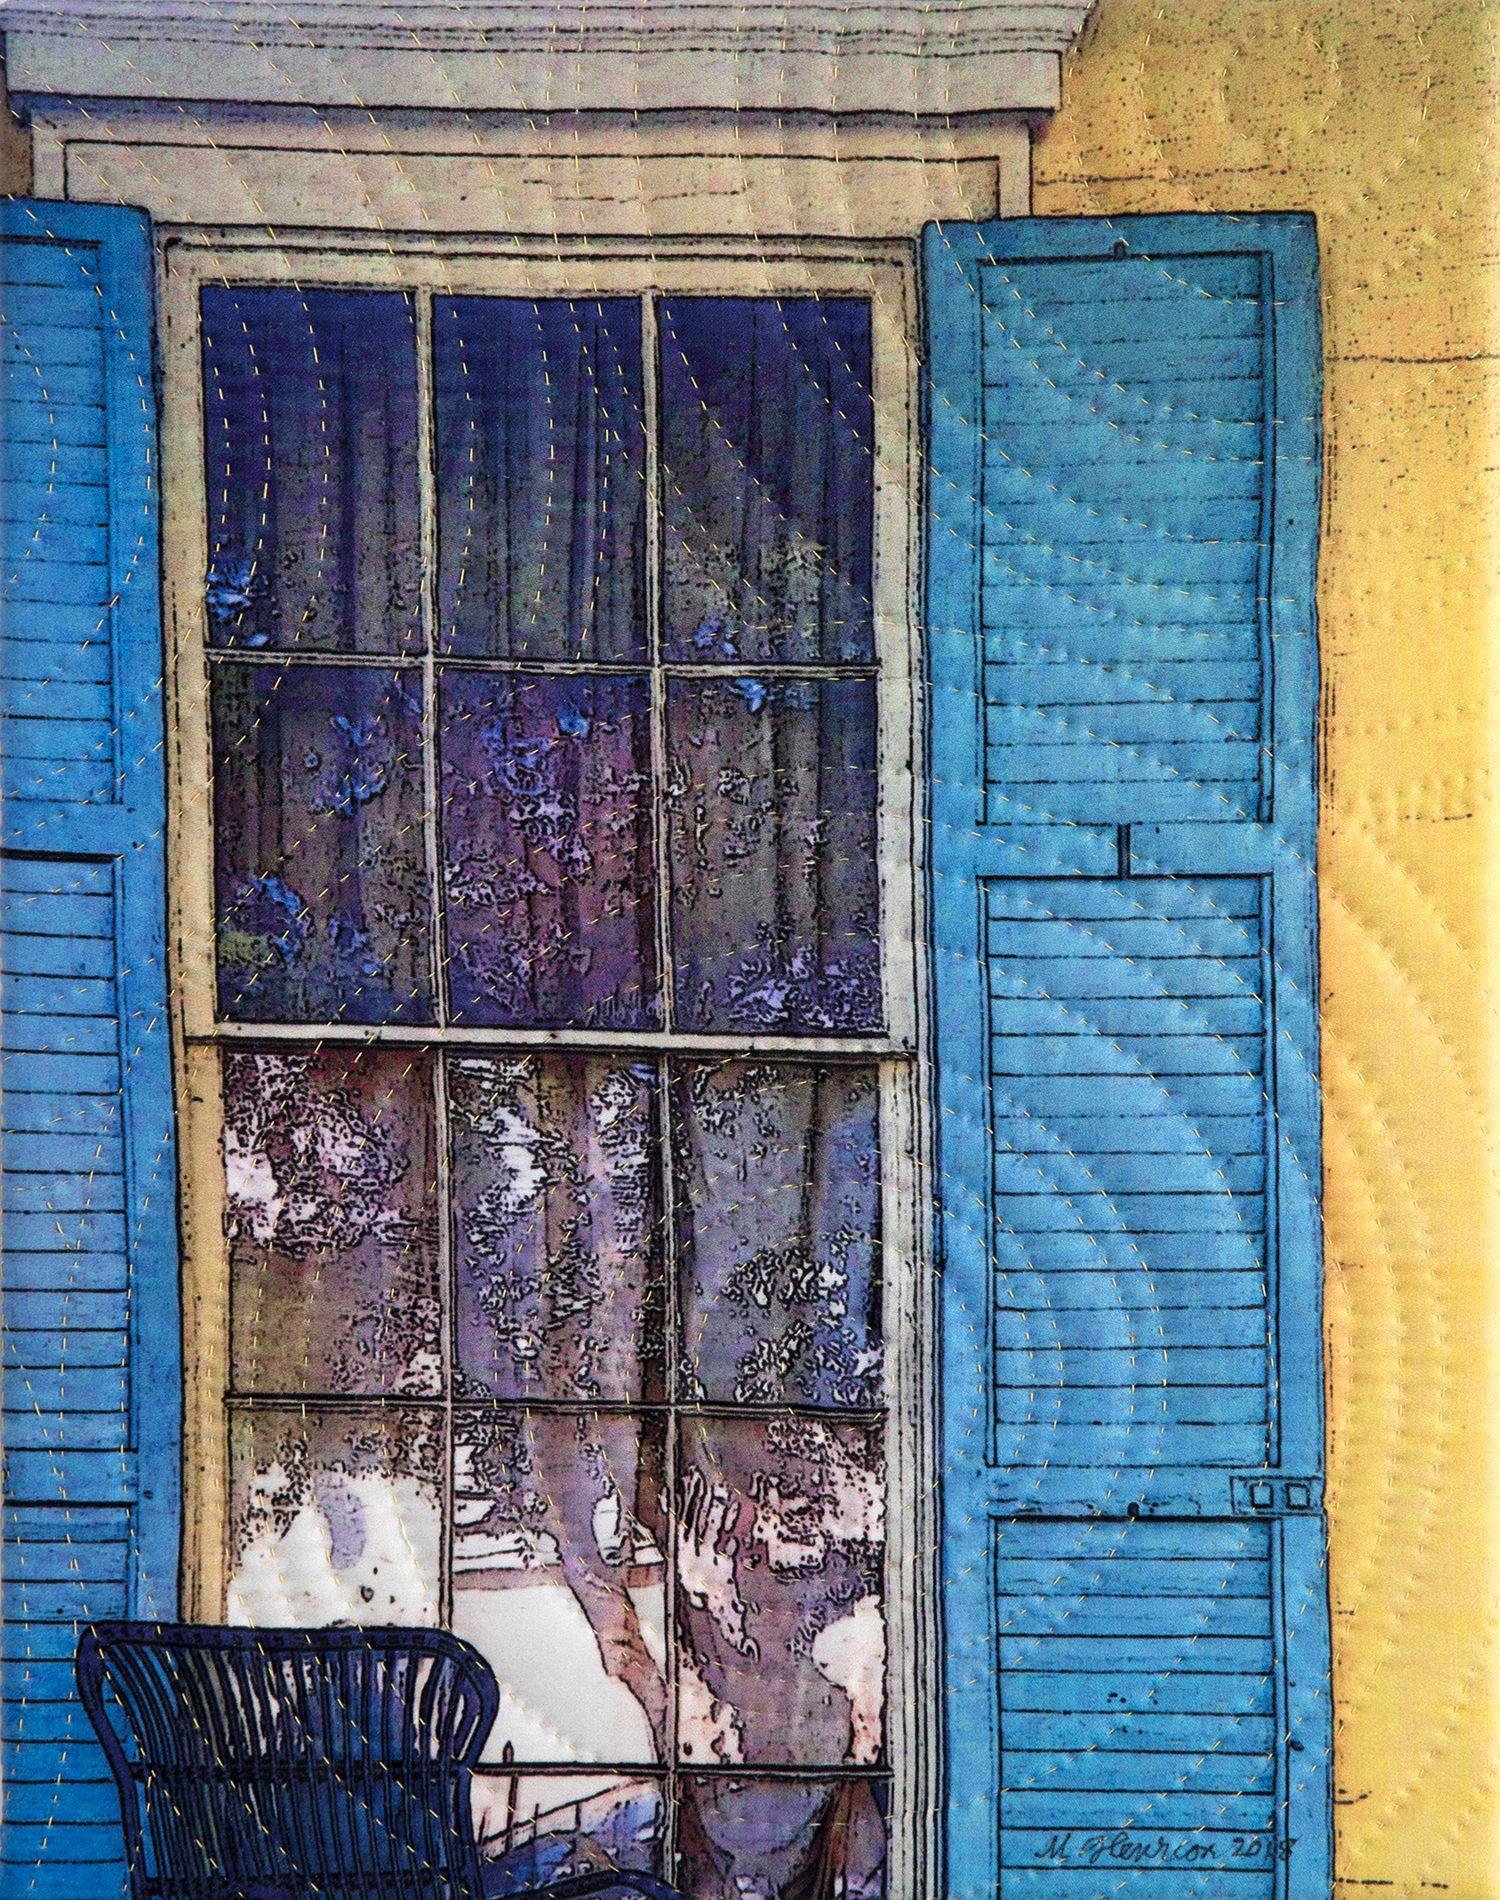 New Orleans-Chestnut Street 2, Mixed Media on Canvas - Mixed Media Art by Marilyn Henrion